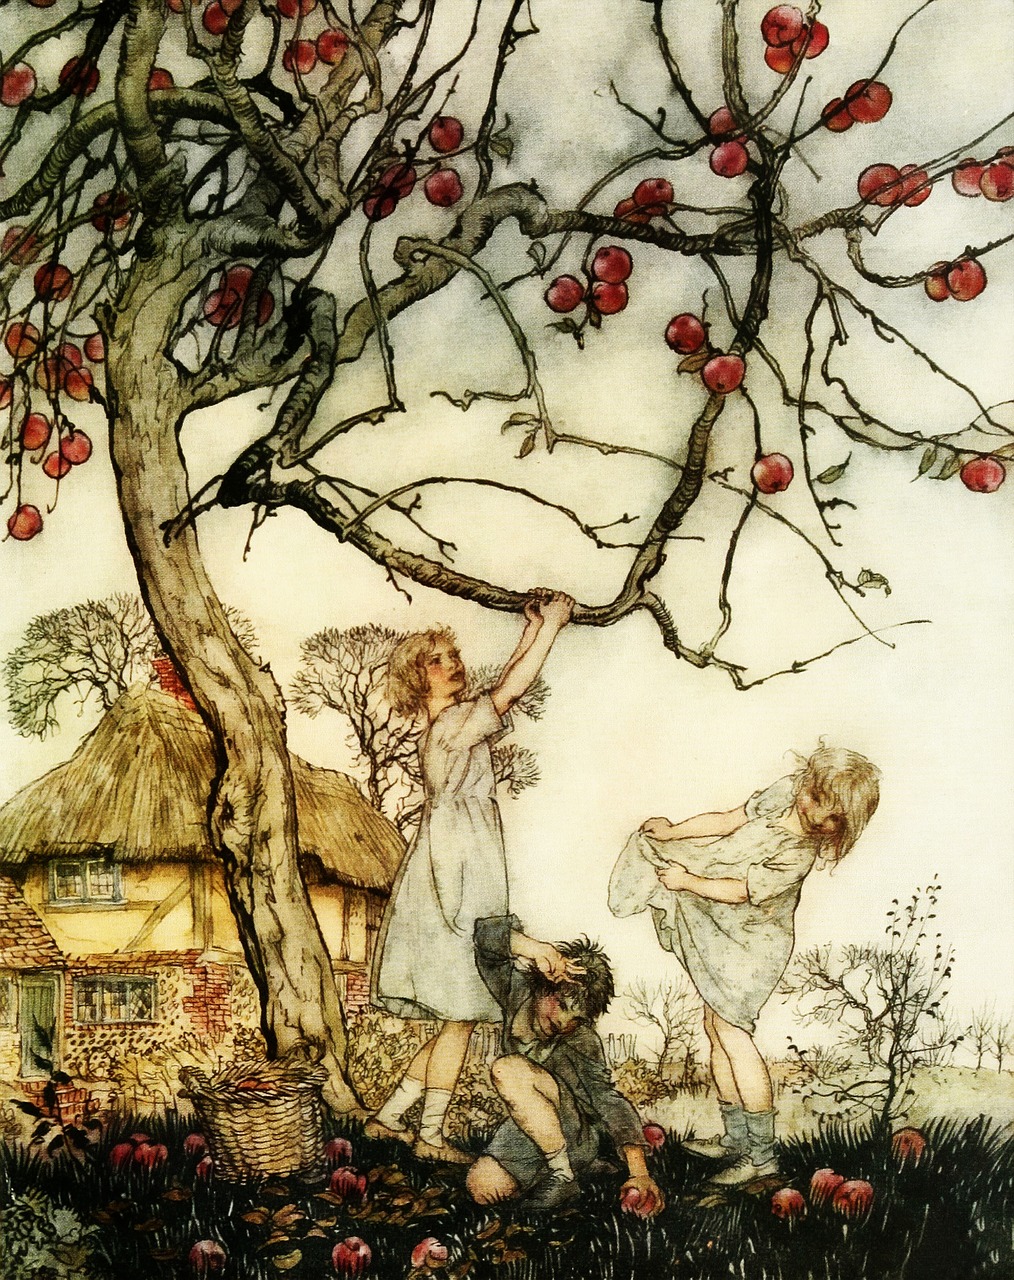 a painting of two children picking apples from a tree, by Arthur Rackham, digital art, poppy, on a village, fairies and scissors, right side composition